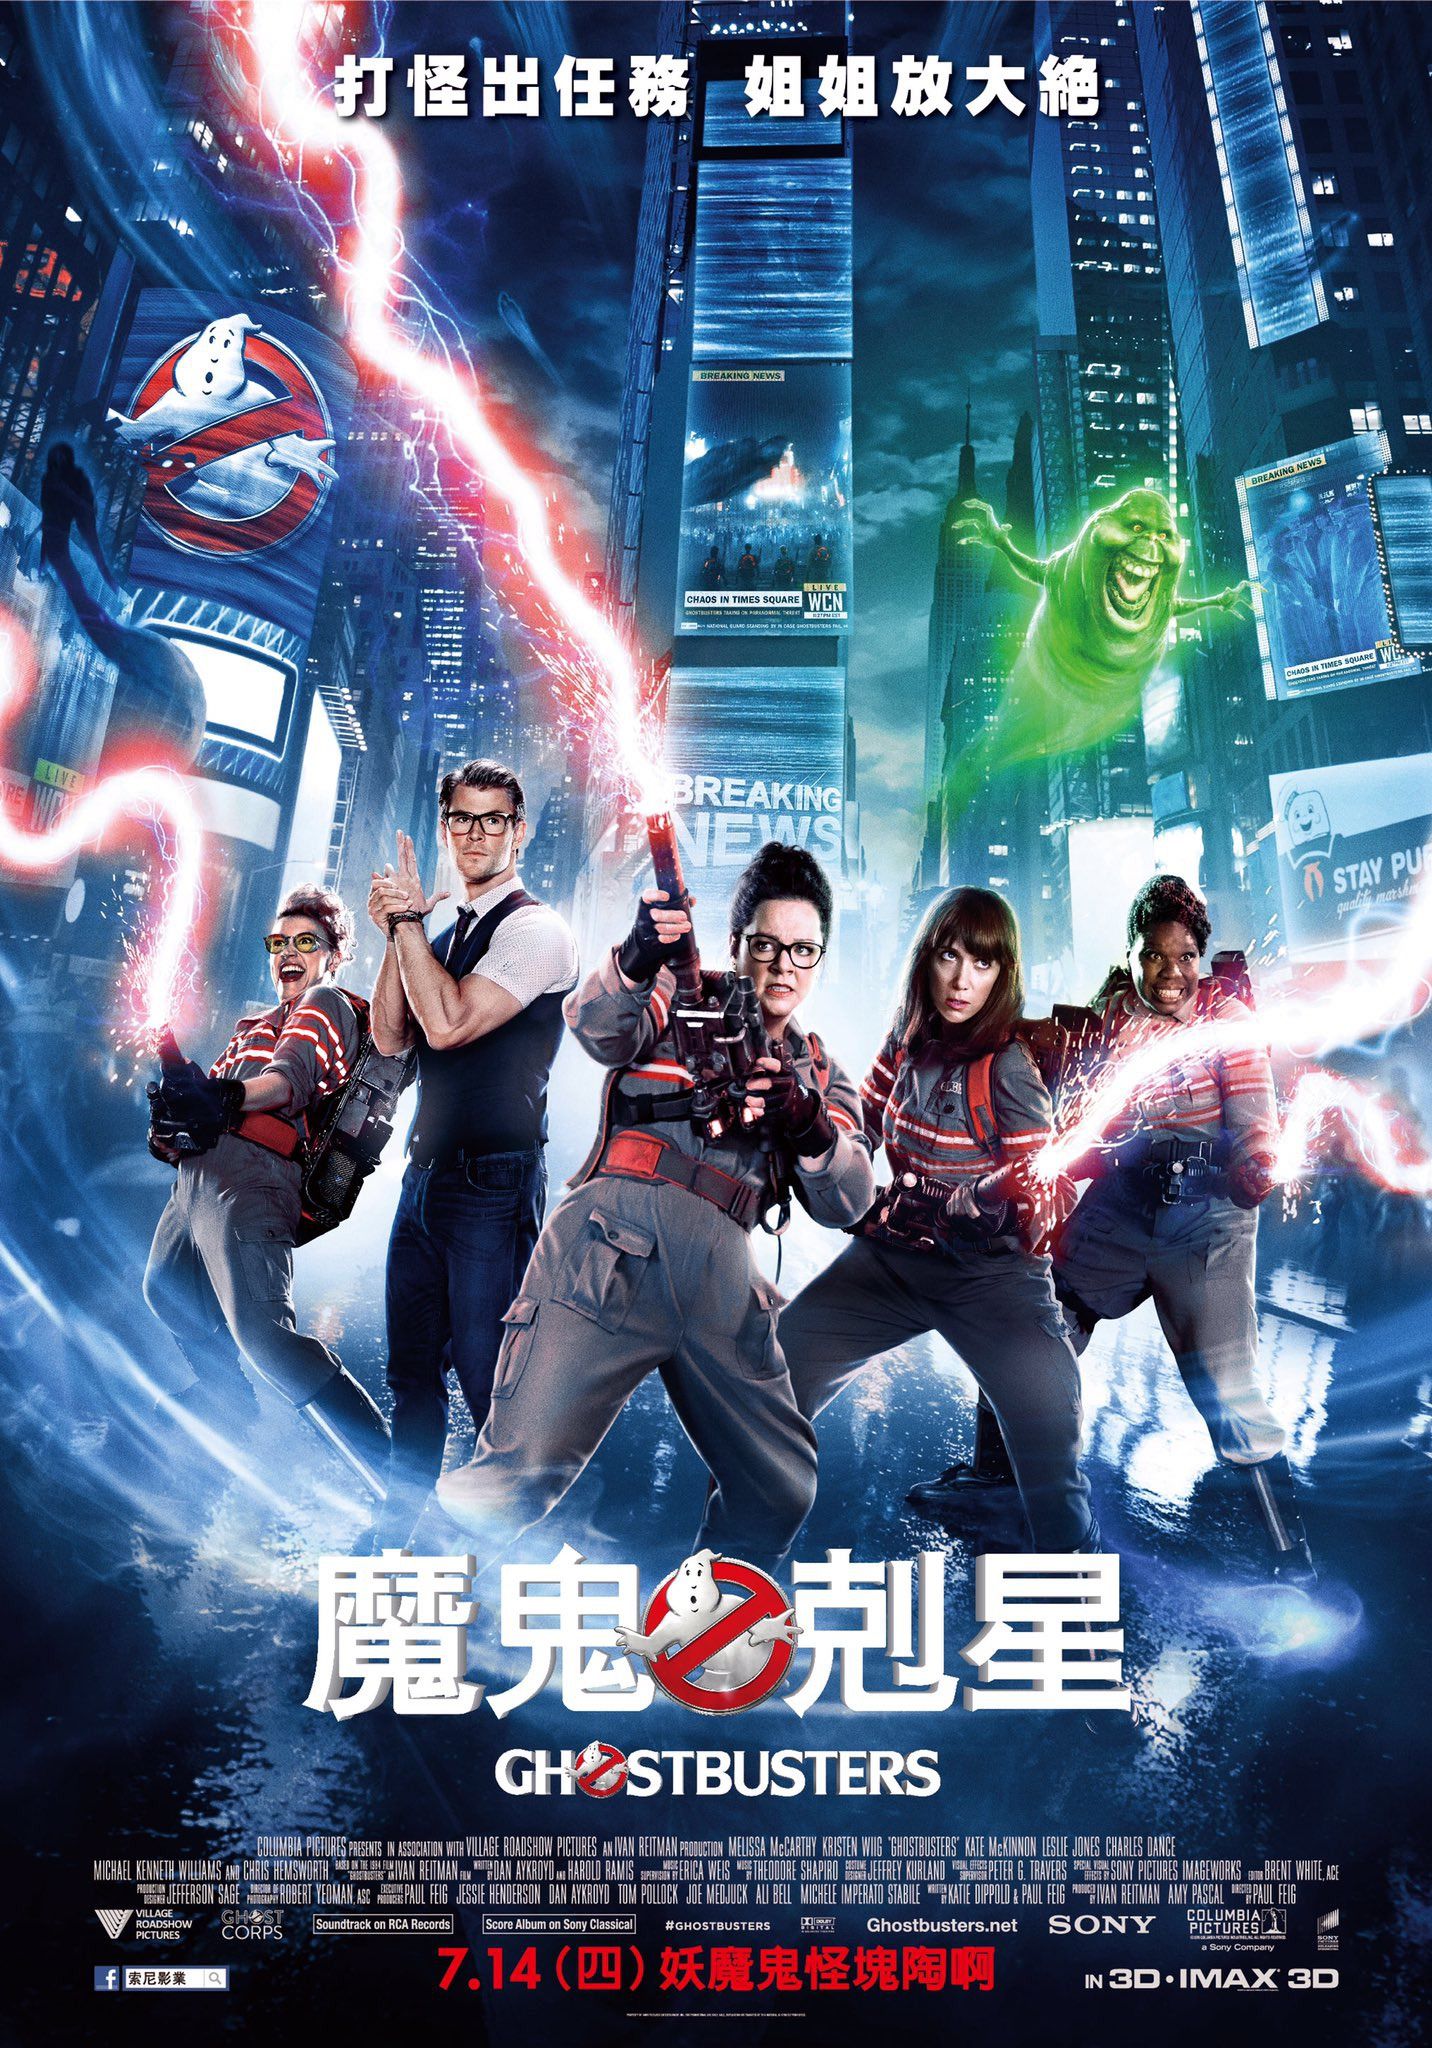 Ghostbusters 2016 international poster